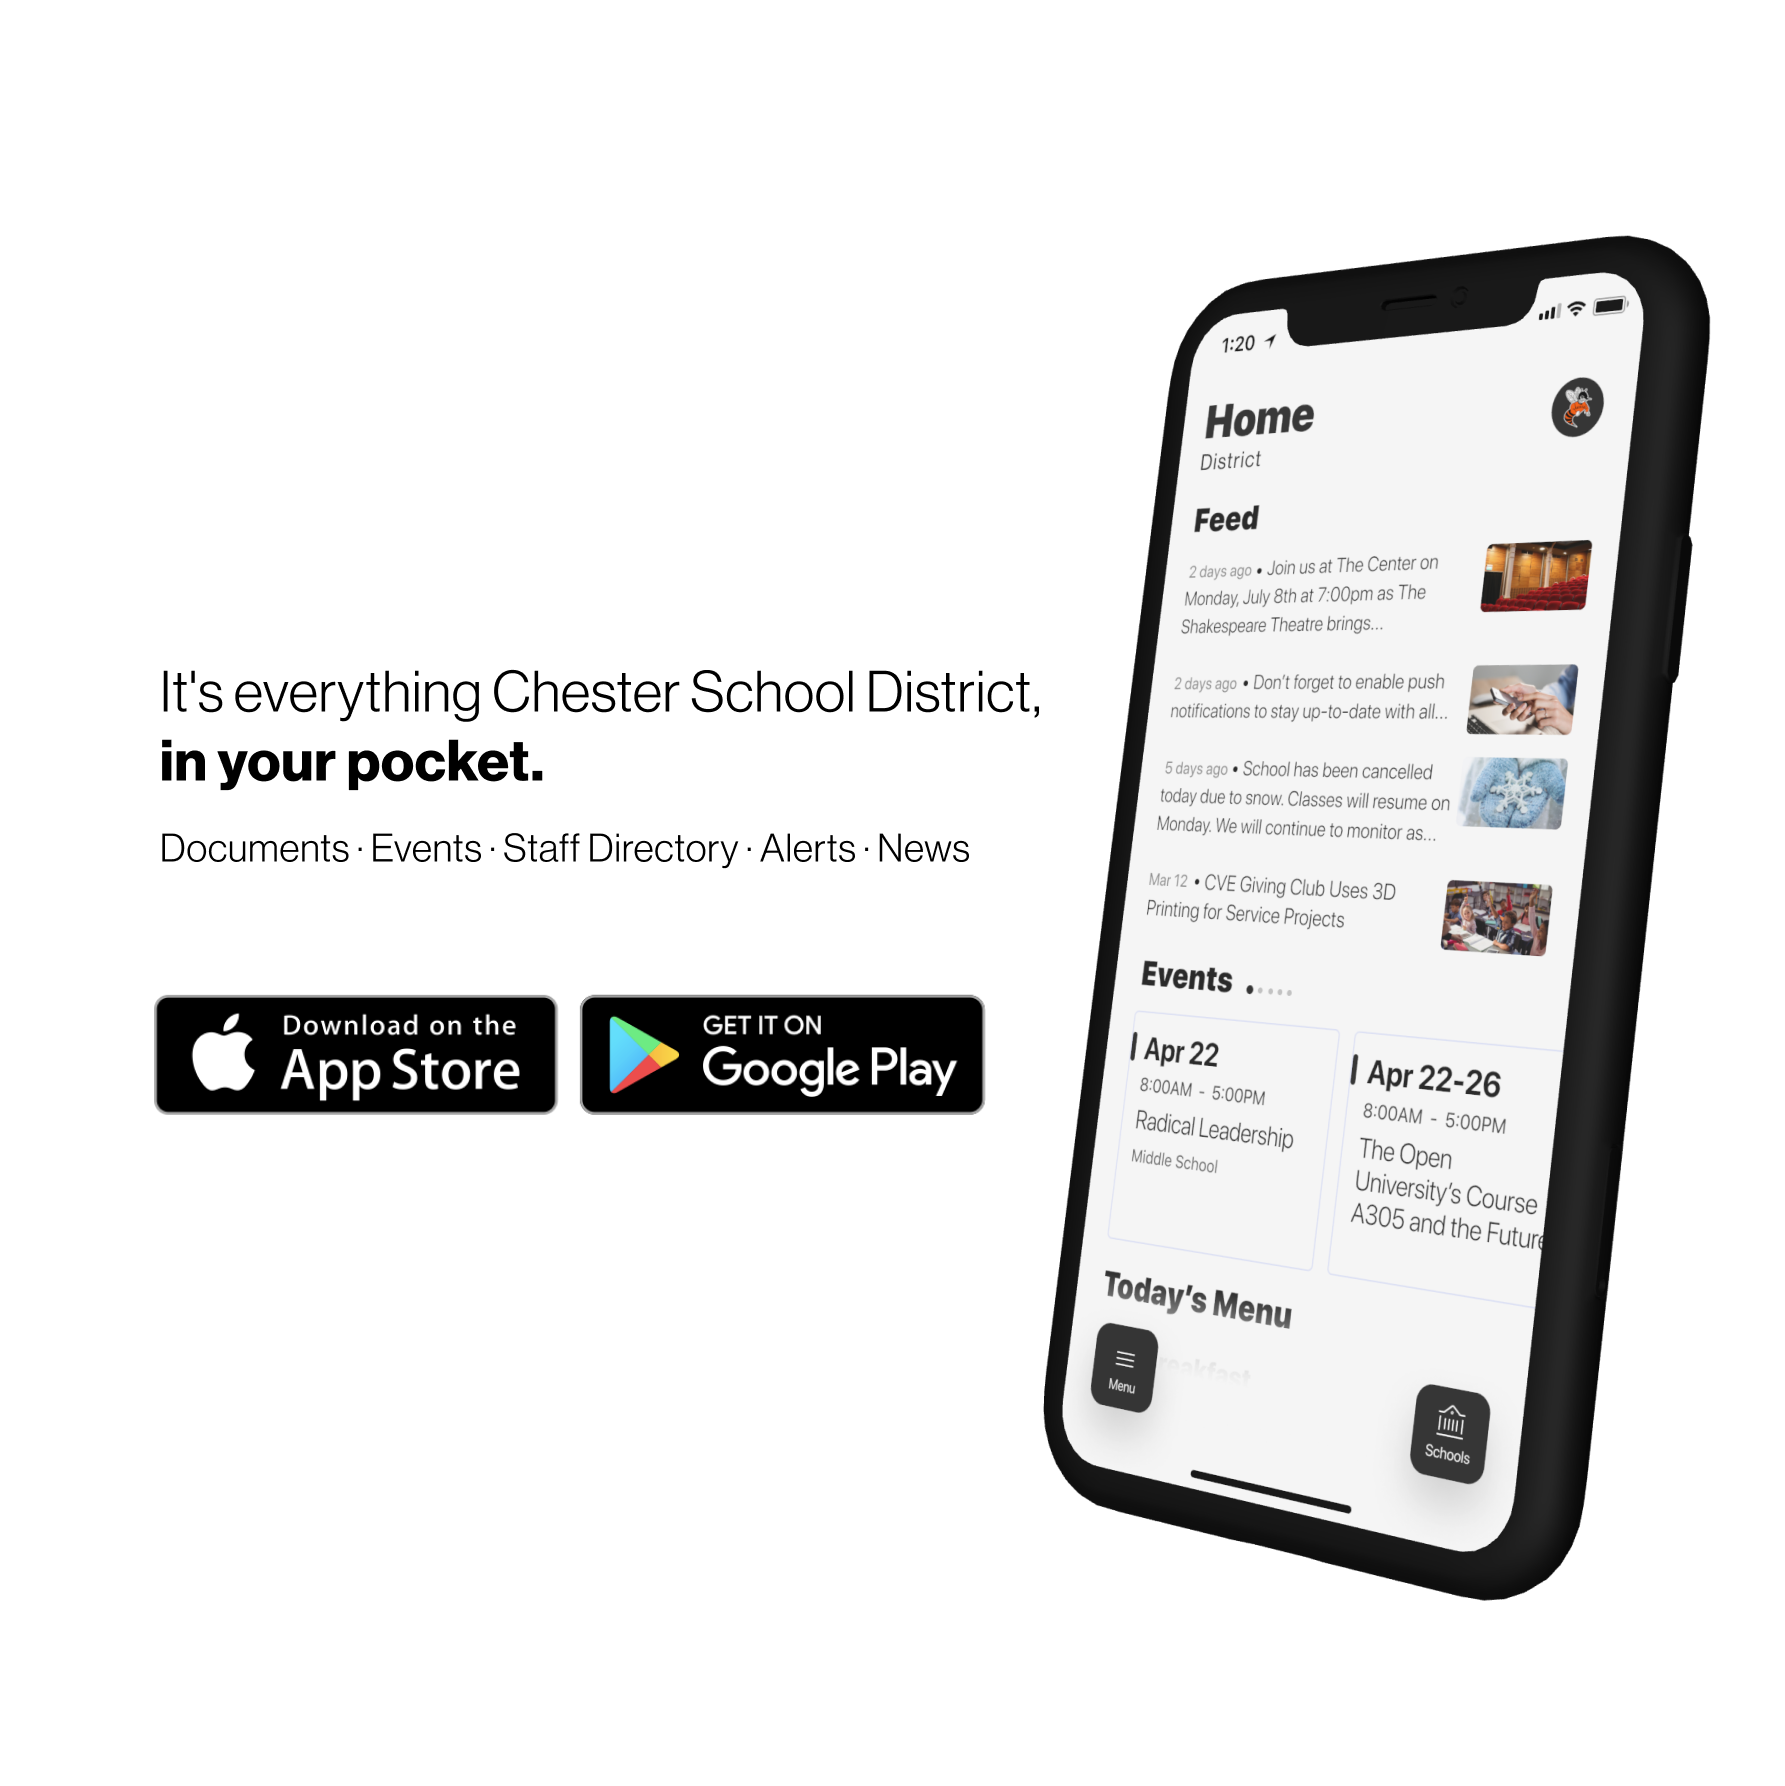 App information - it's everything Chester, in your pocket